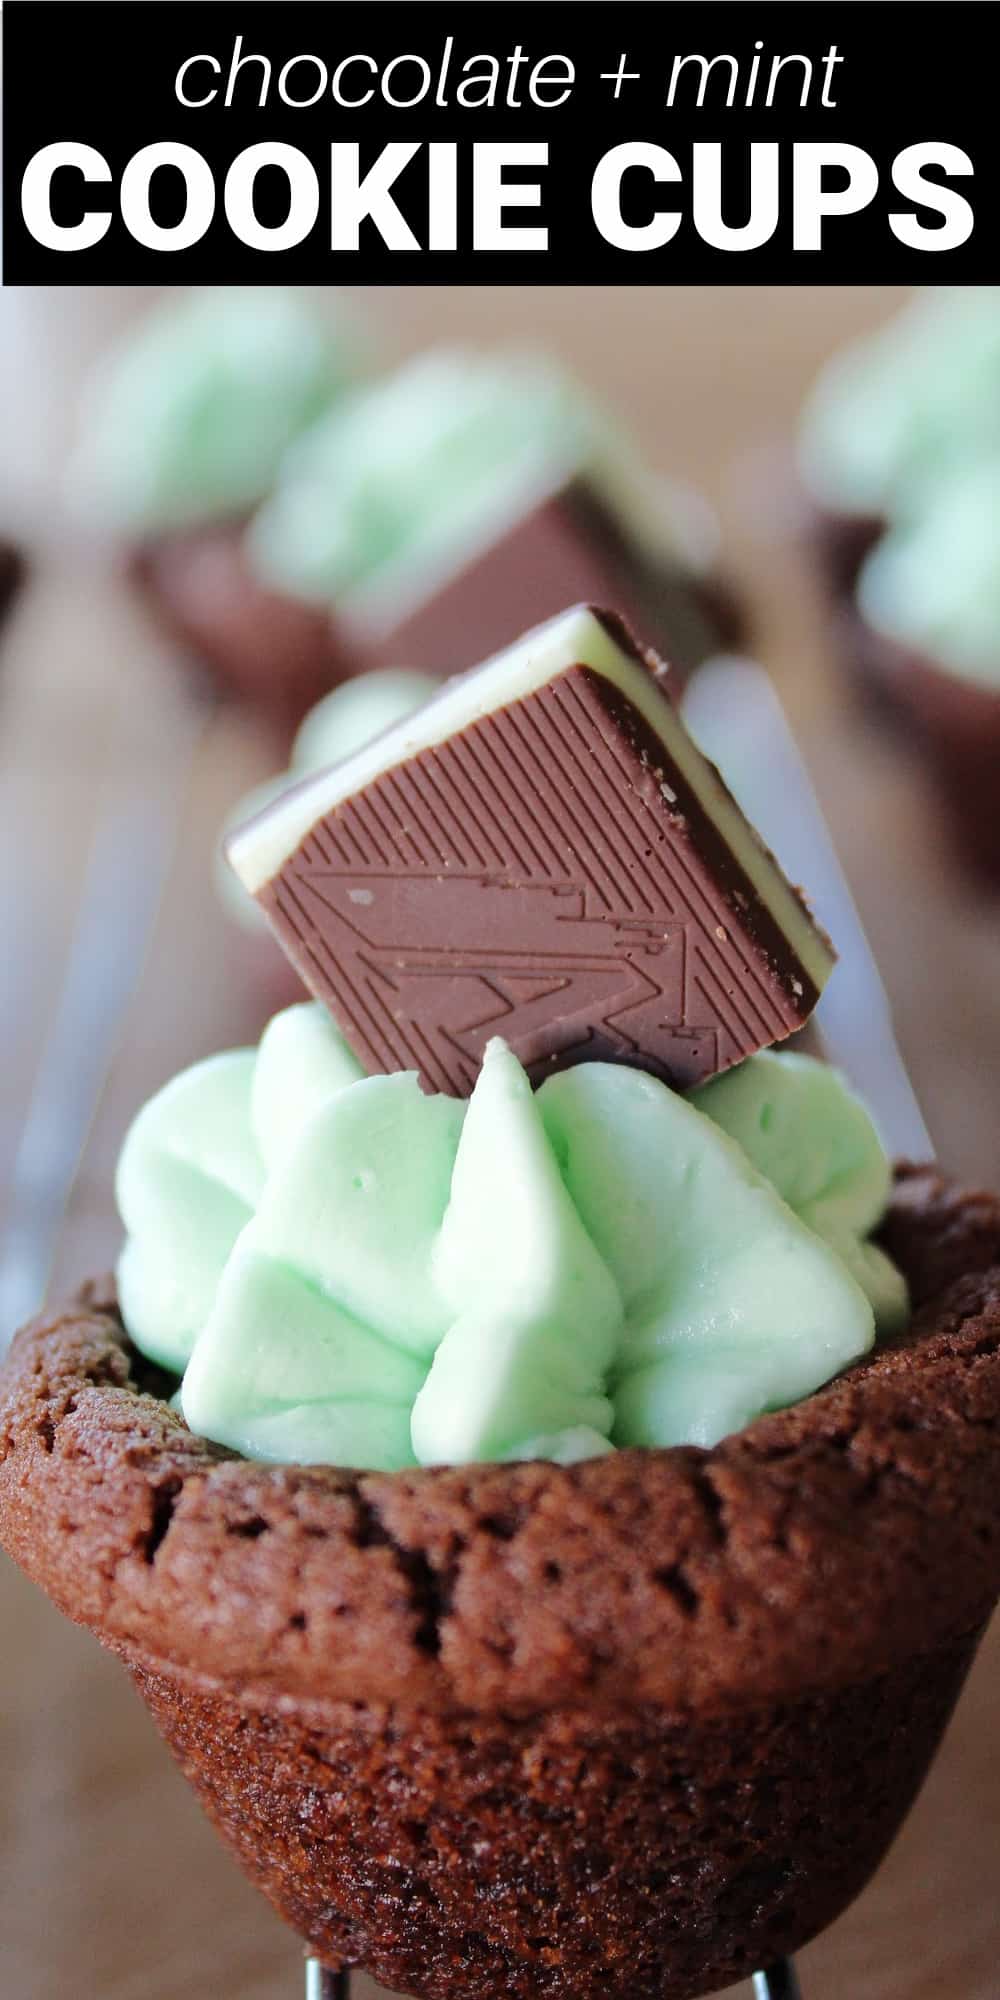 Chocolate mint cookie cups are a simple chocolate cookie dough pressed into a mini-muffin pan making a hole to fill with creamy mint buttercream frosting. Topped with an Andes mint, these are a cute chocolate mint dessert.